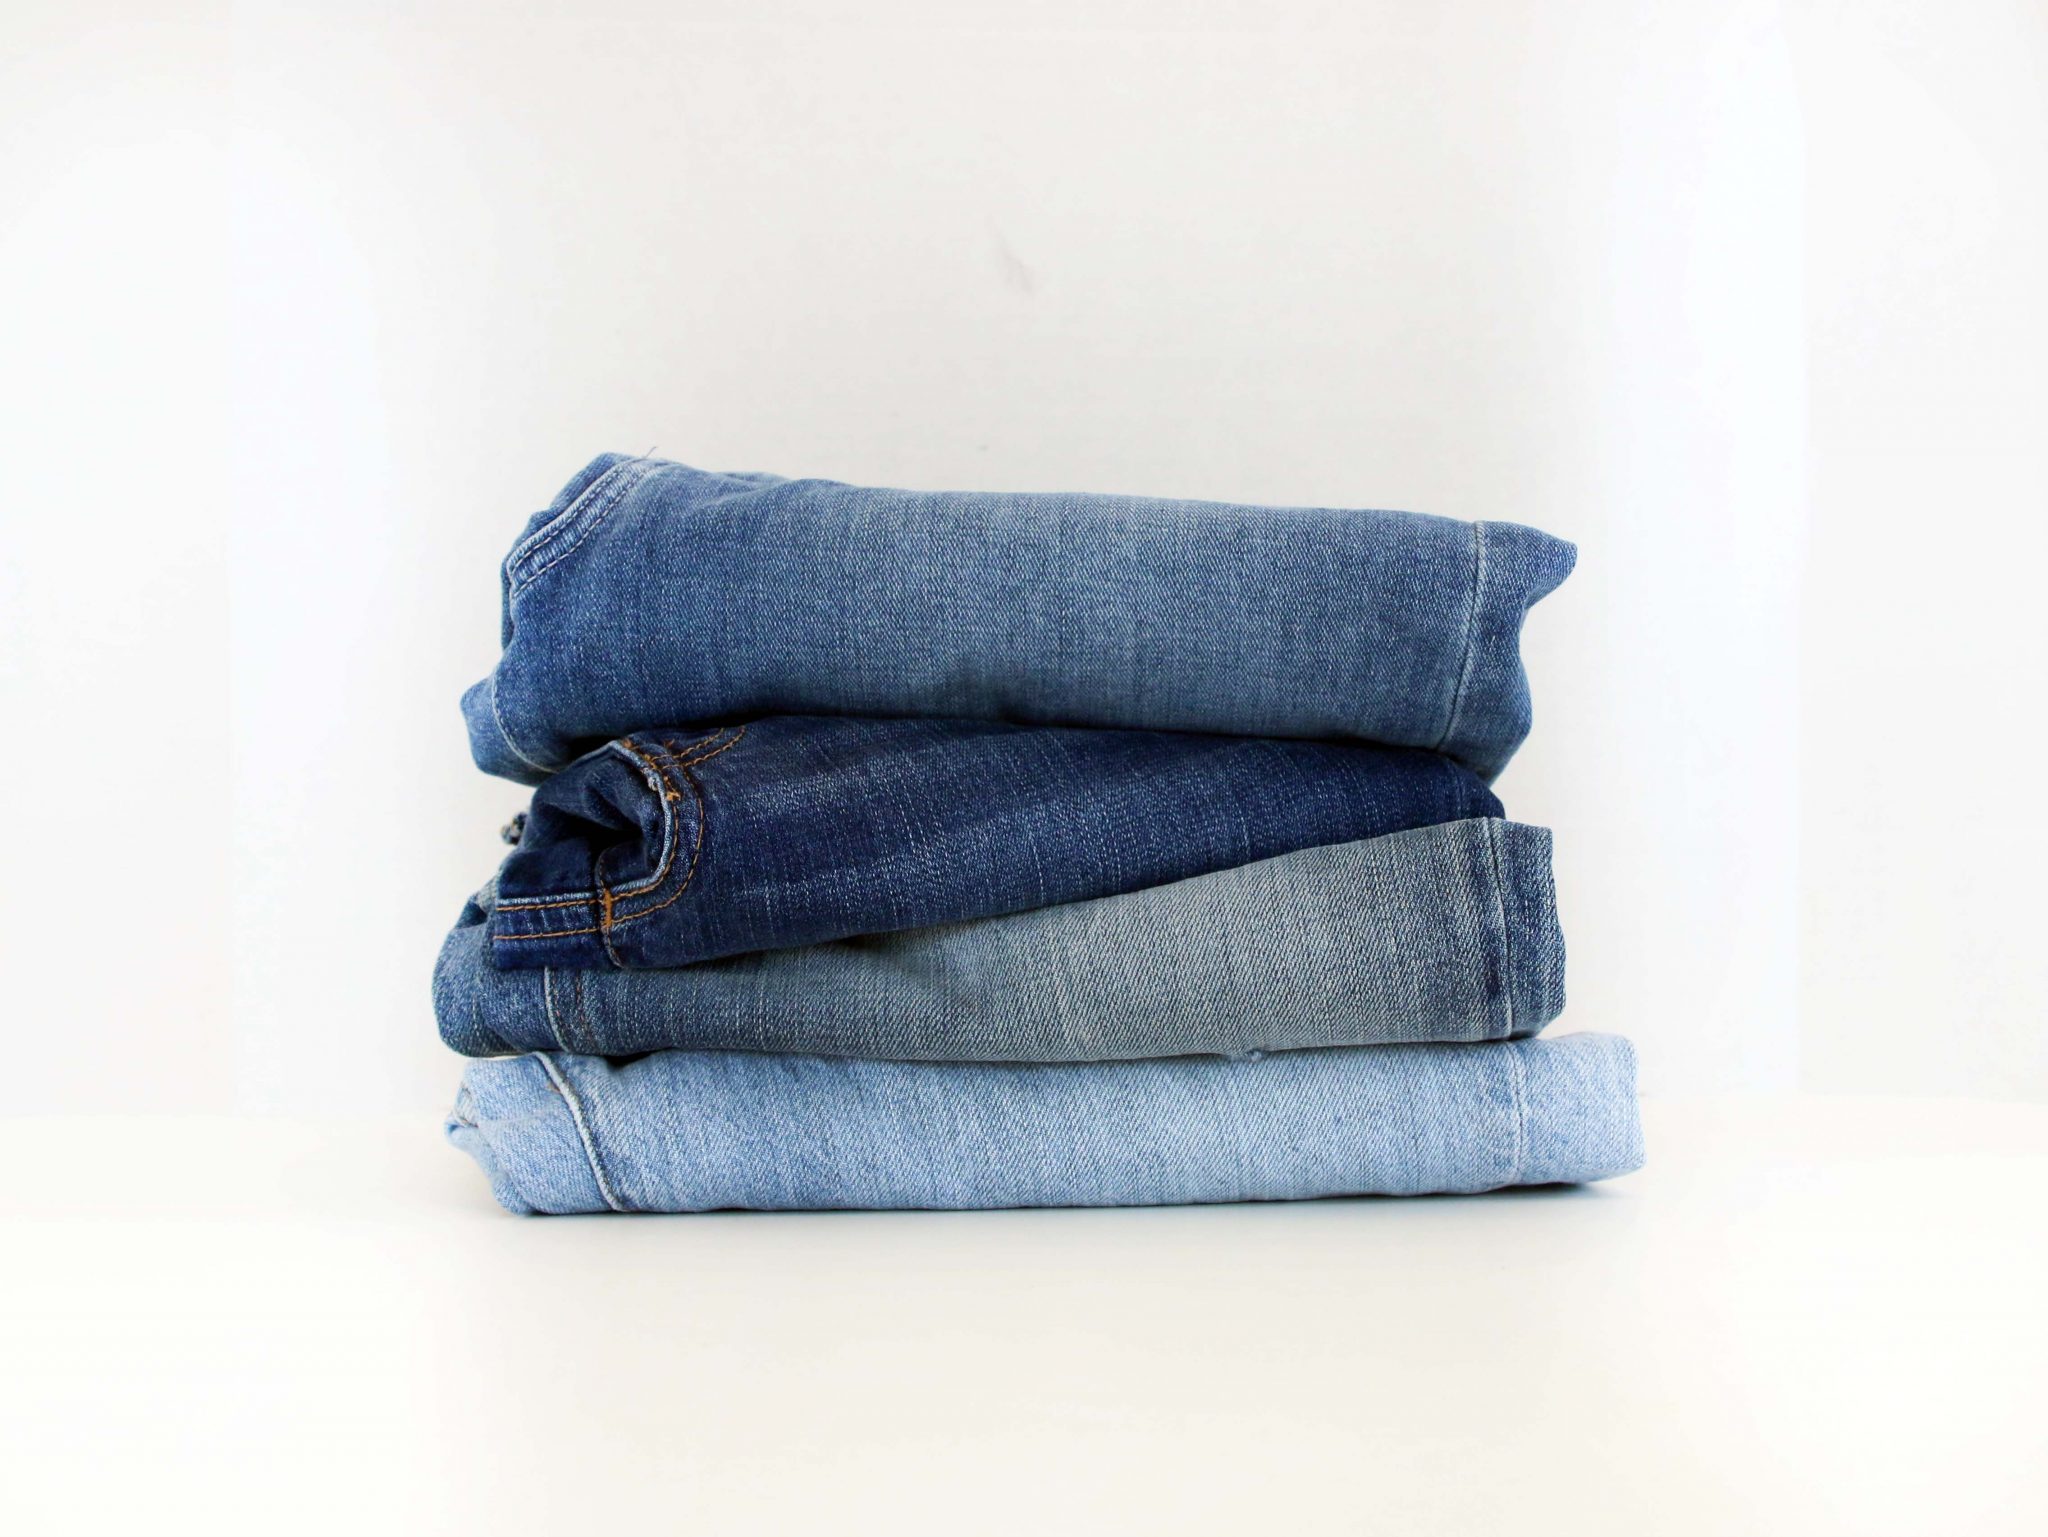 Buying Sustainable Jeans - HarassedMom